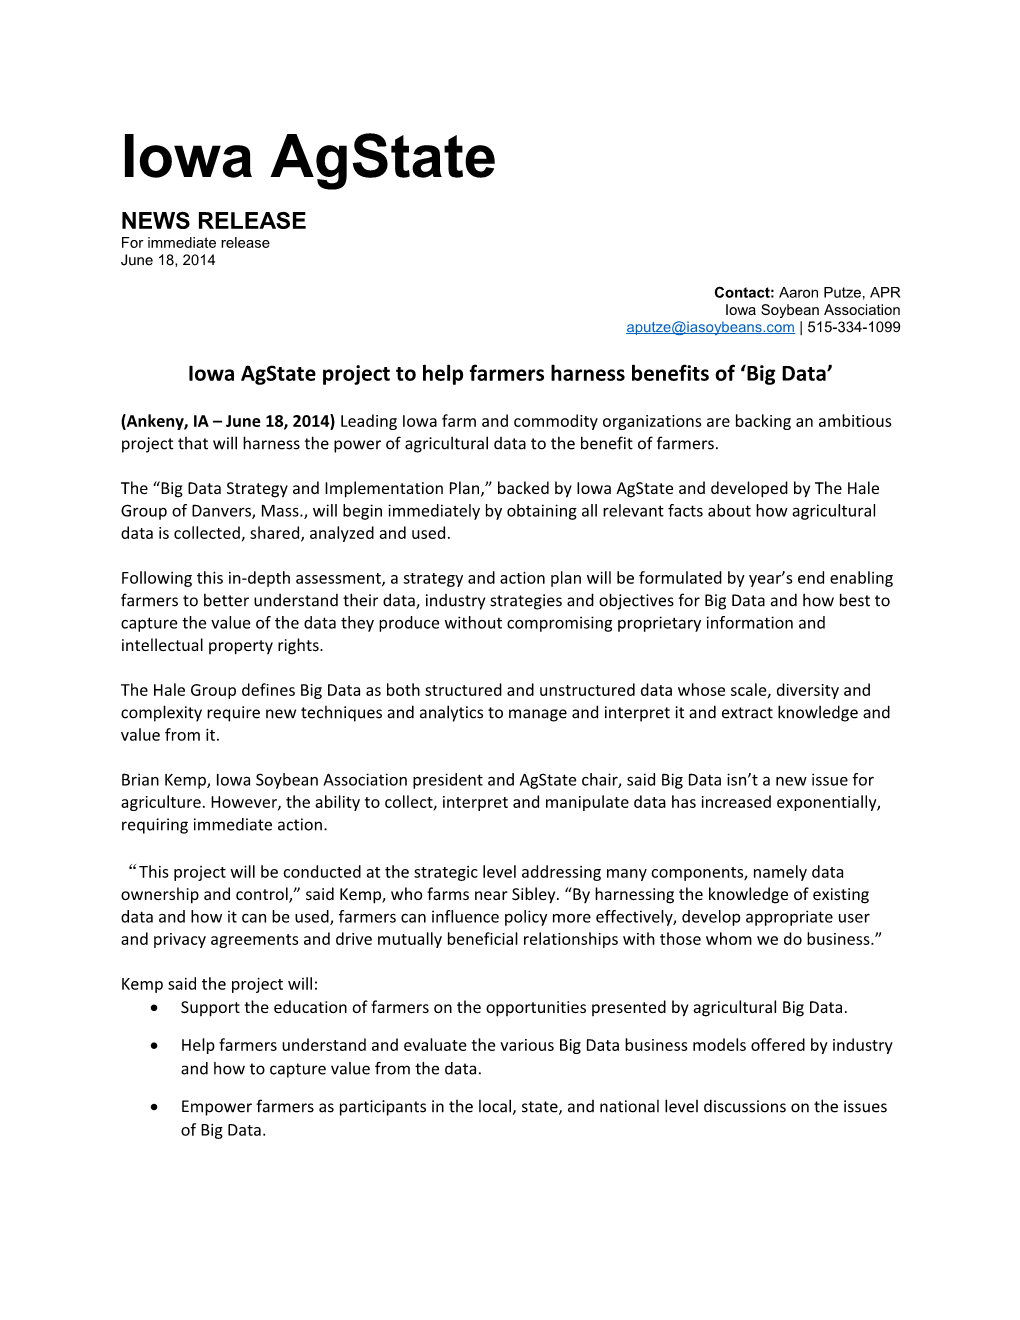 Iowa Agstate Project to Help Farmers Harness Benefits of Big Data